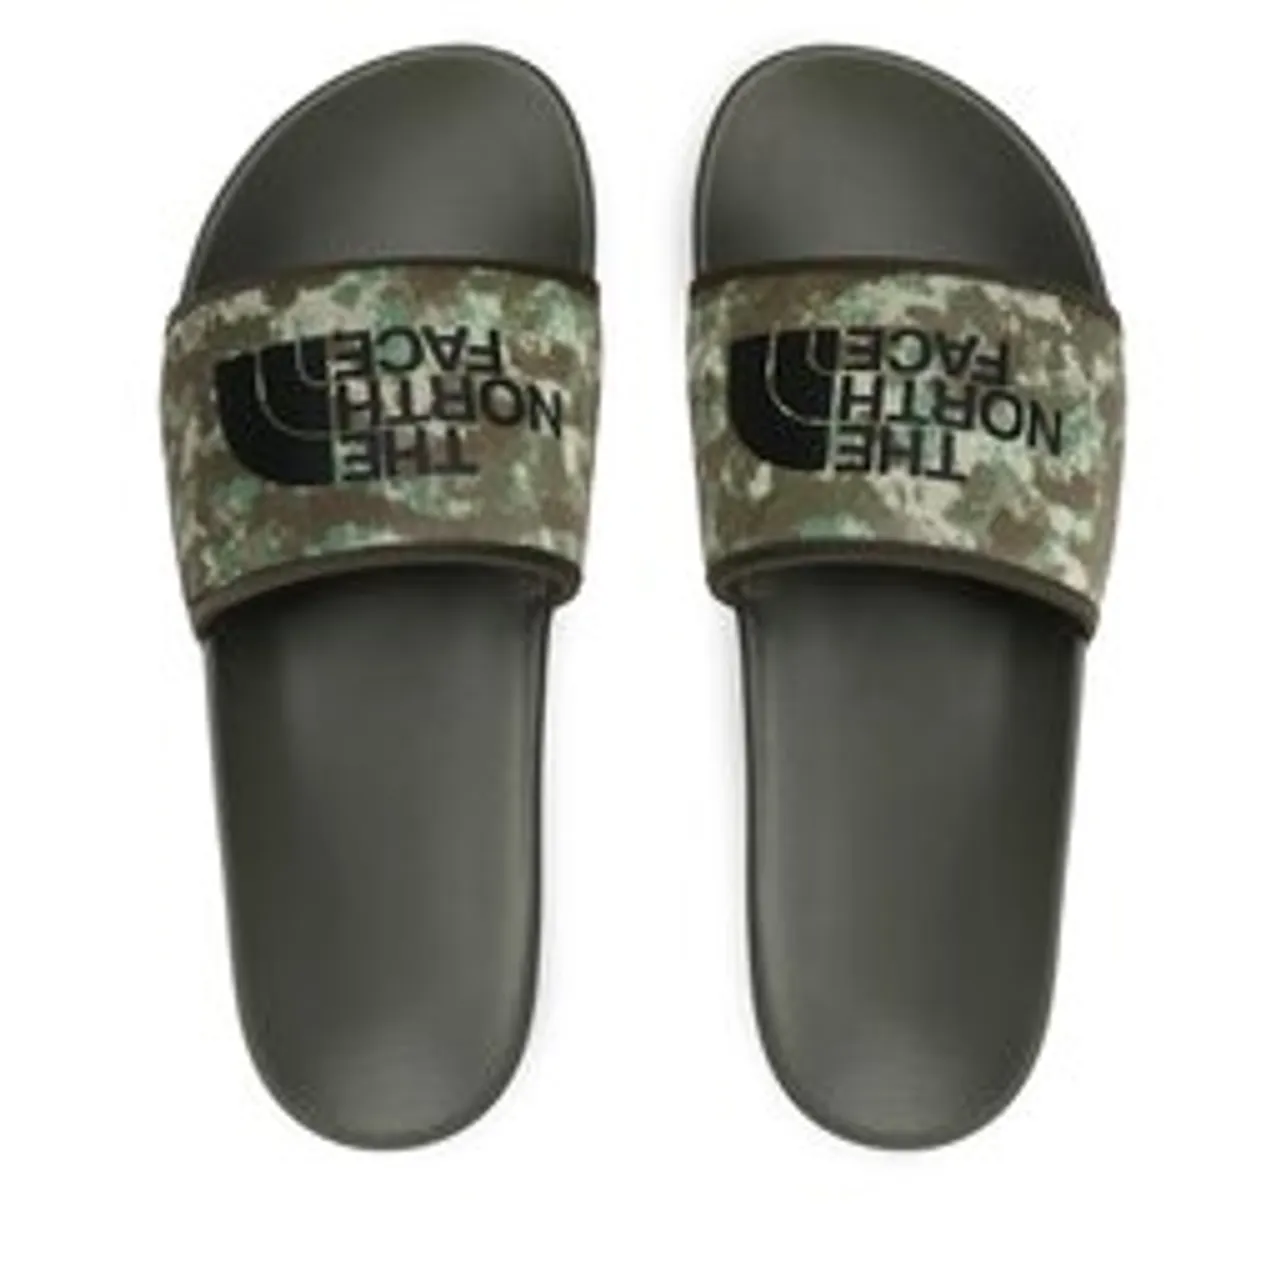 Pantoletten The North Face M Base Camp Slide Iii NF0A4T2RIYL1 Military Olive Stippled Camo Print/Tnf Black